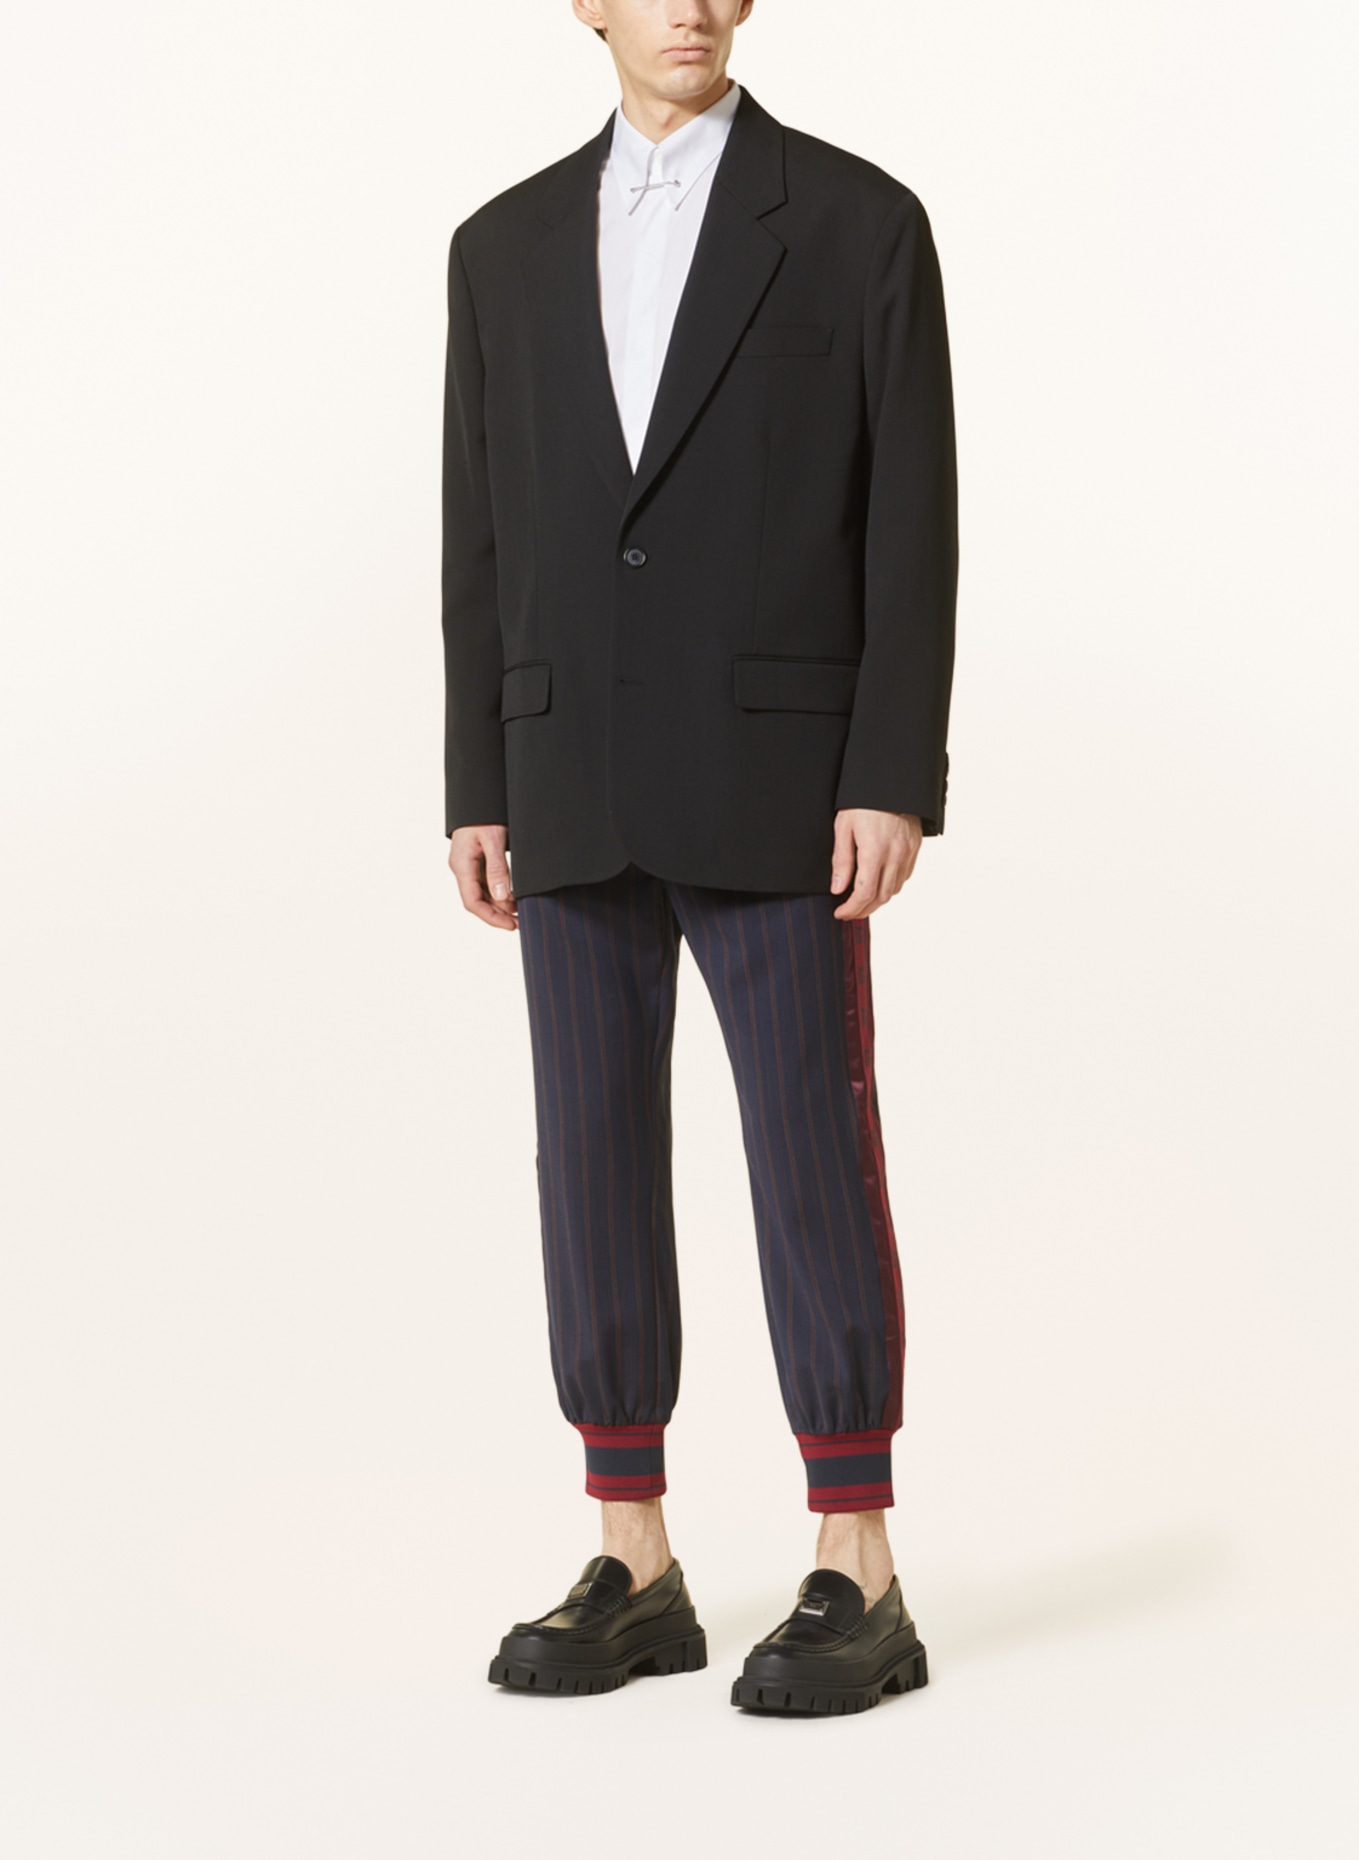 DOLCE & GABBANA Pants in jogger style with tuxedo stripes, Color: BLACK/ DARK RED (Image 2)